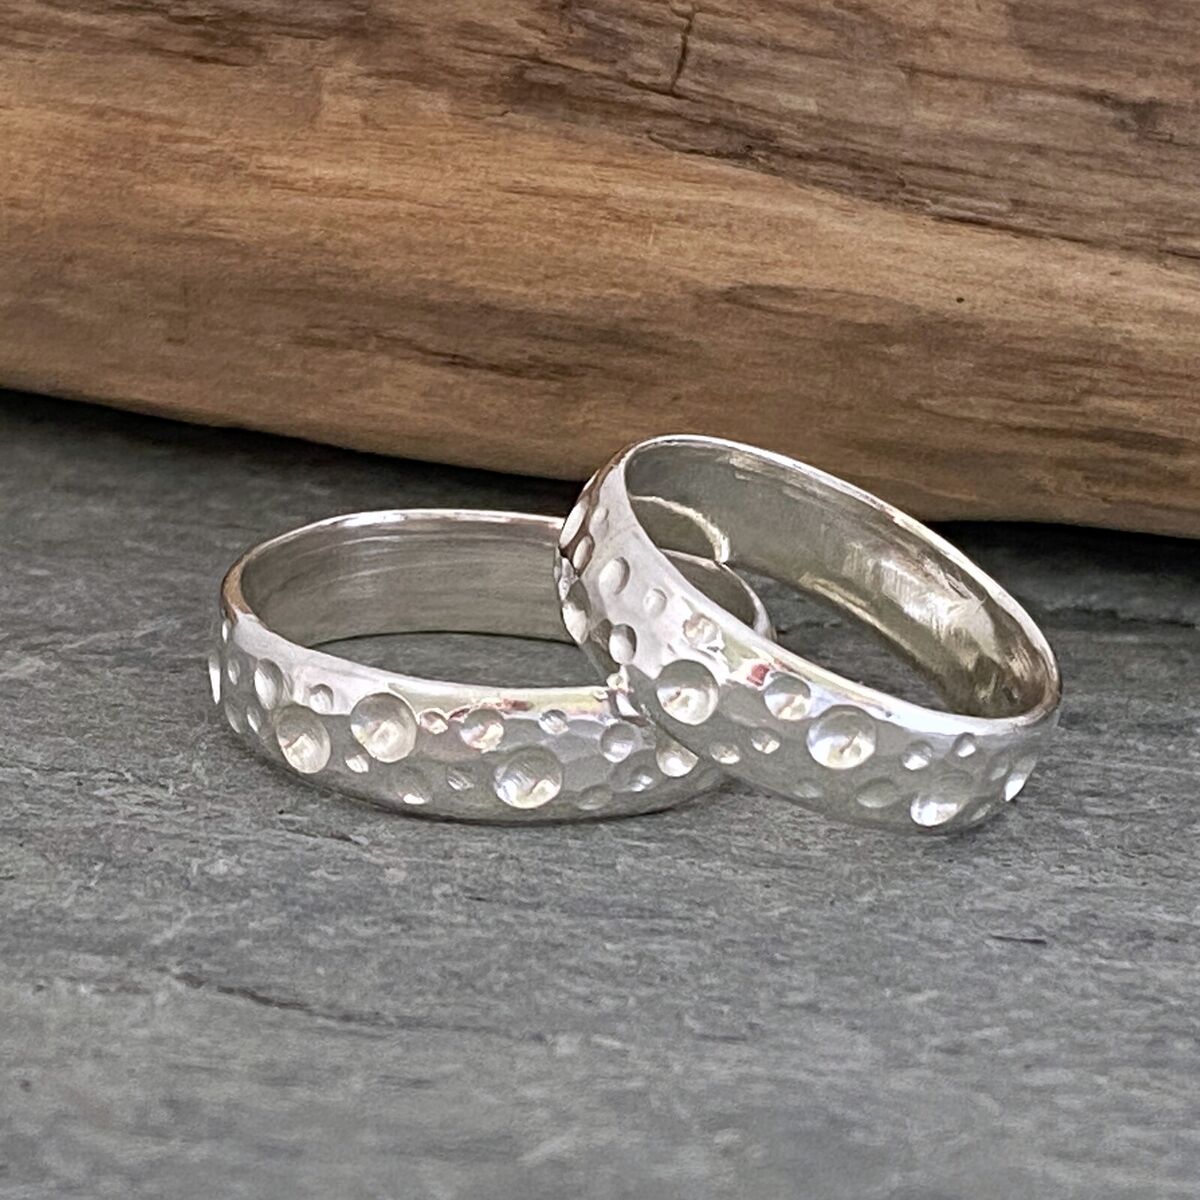 Patterned ring band